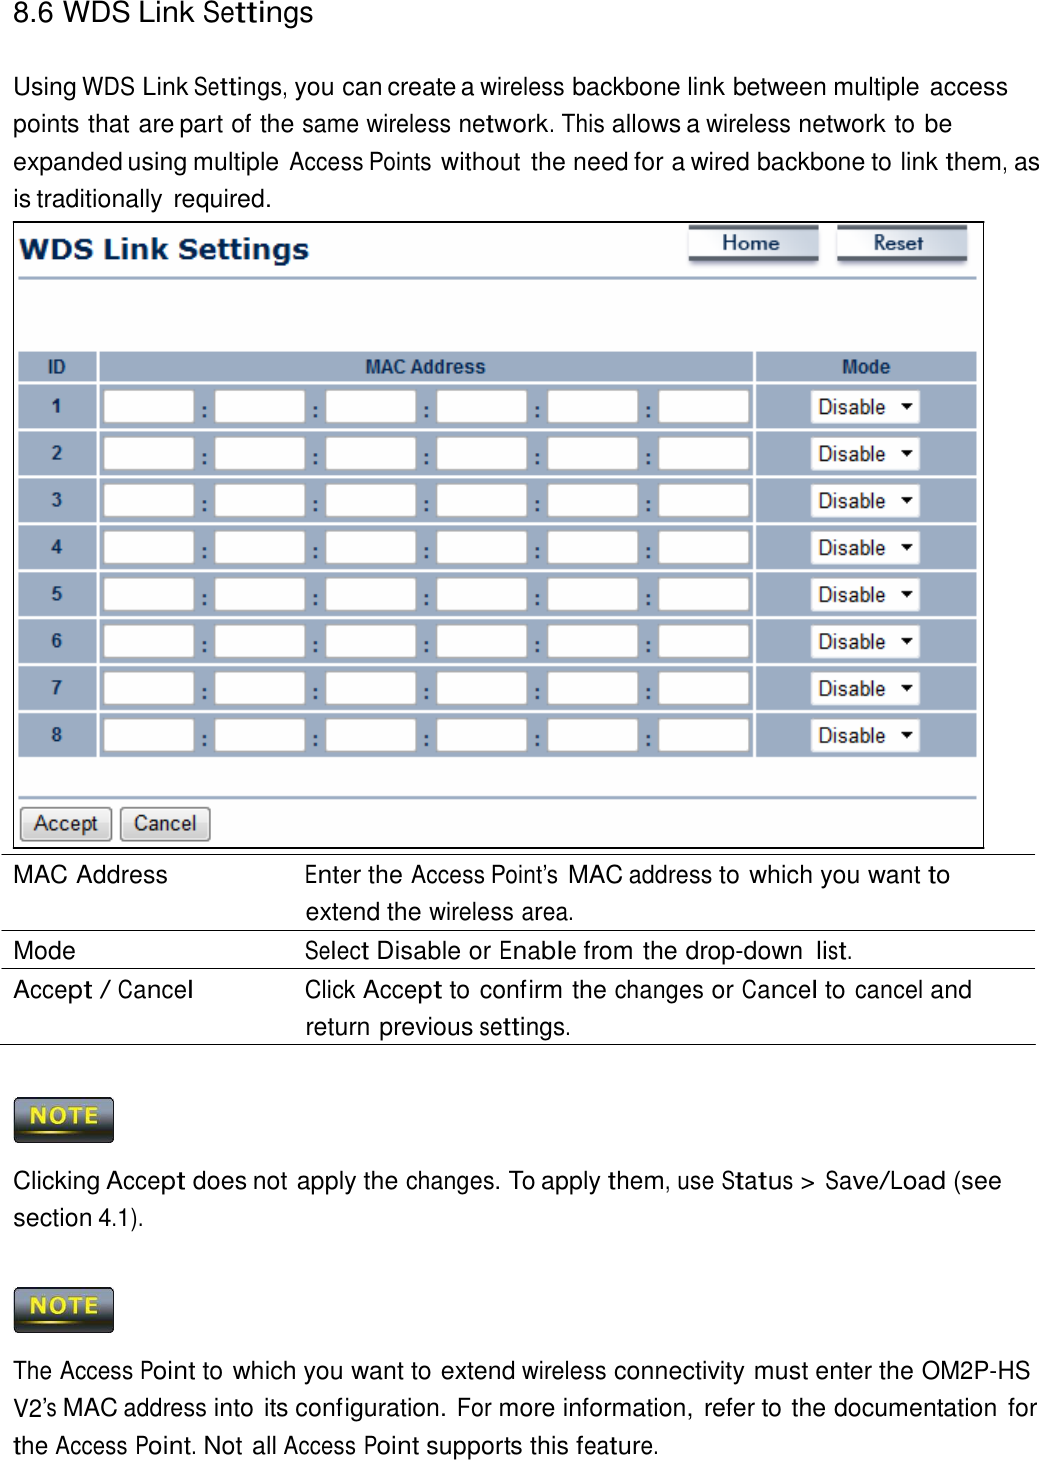 8.6 WDS Link Settings    Using WDS Link Settings, you can create a wireless backbone link between multiple access points that are part of the same wireless network. This allows a wireless network to be expanded using multiple Access Points without the need for a wired backbone to link them, as is traditionally required.                                MAC Address  Enter the Access Point’s MAC address to which you want to extend the wireless area. Mode  Select Disable or Enable from the drop-down list. Accept / Cancel Click Accept to confirm the changes or Cancel to cancel and return previous settings.      Clicking Accept does not apply the changes. To apply them, use Status &gt; Save/Load (see section 4.1).      The Access Point to which you want to extend wireless connectivity must enter the OM2P-HS V2’s MAC address into its configuration. For more information,  refer to the documentation for the Access Point. Not all Access Point supports this feature. 